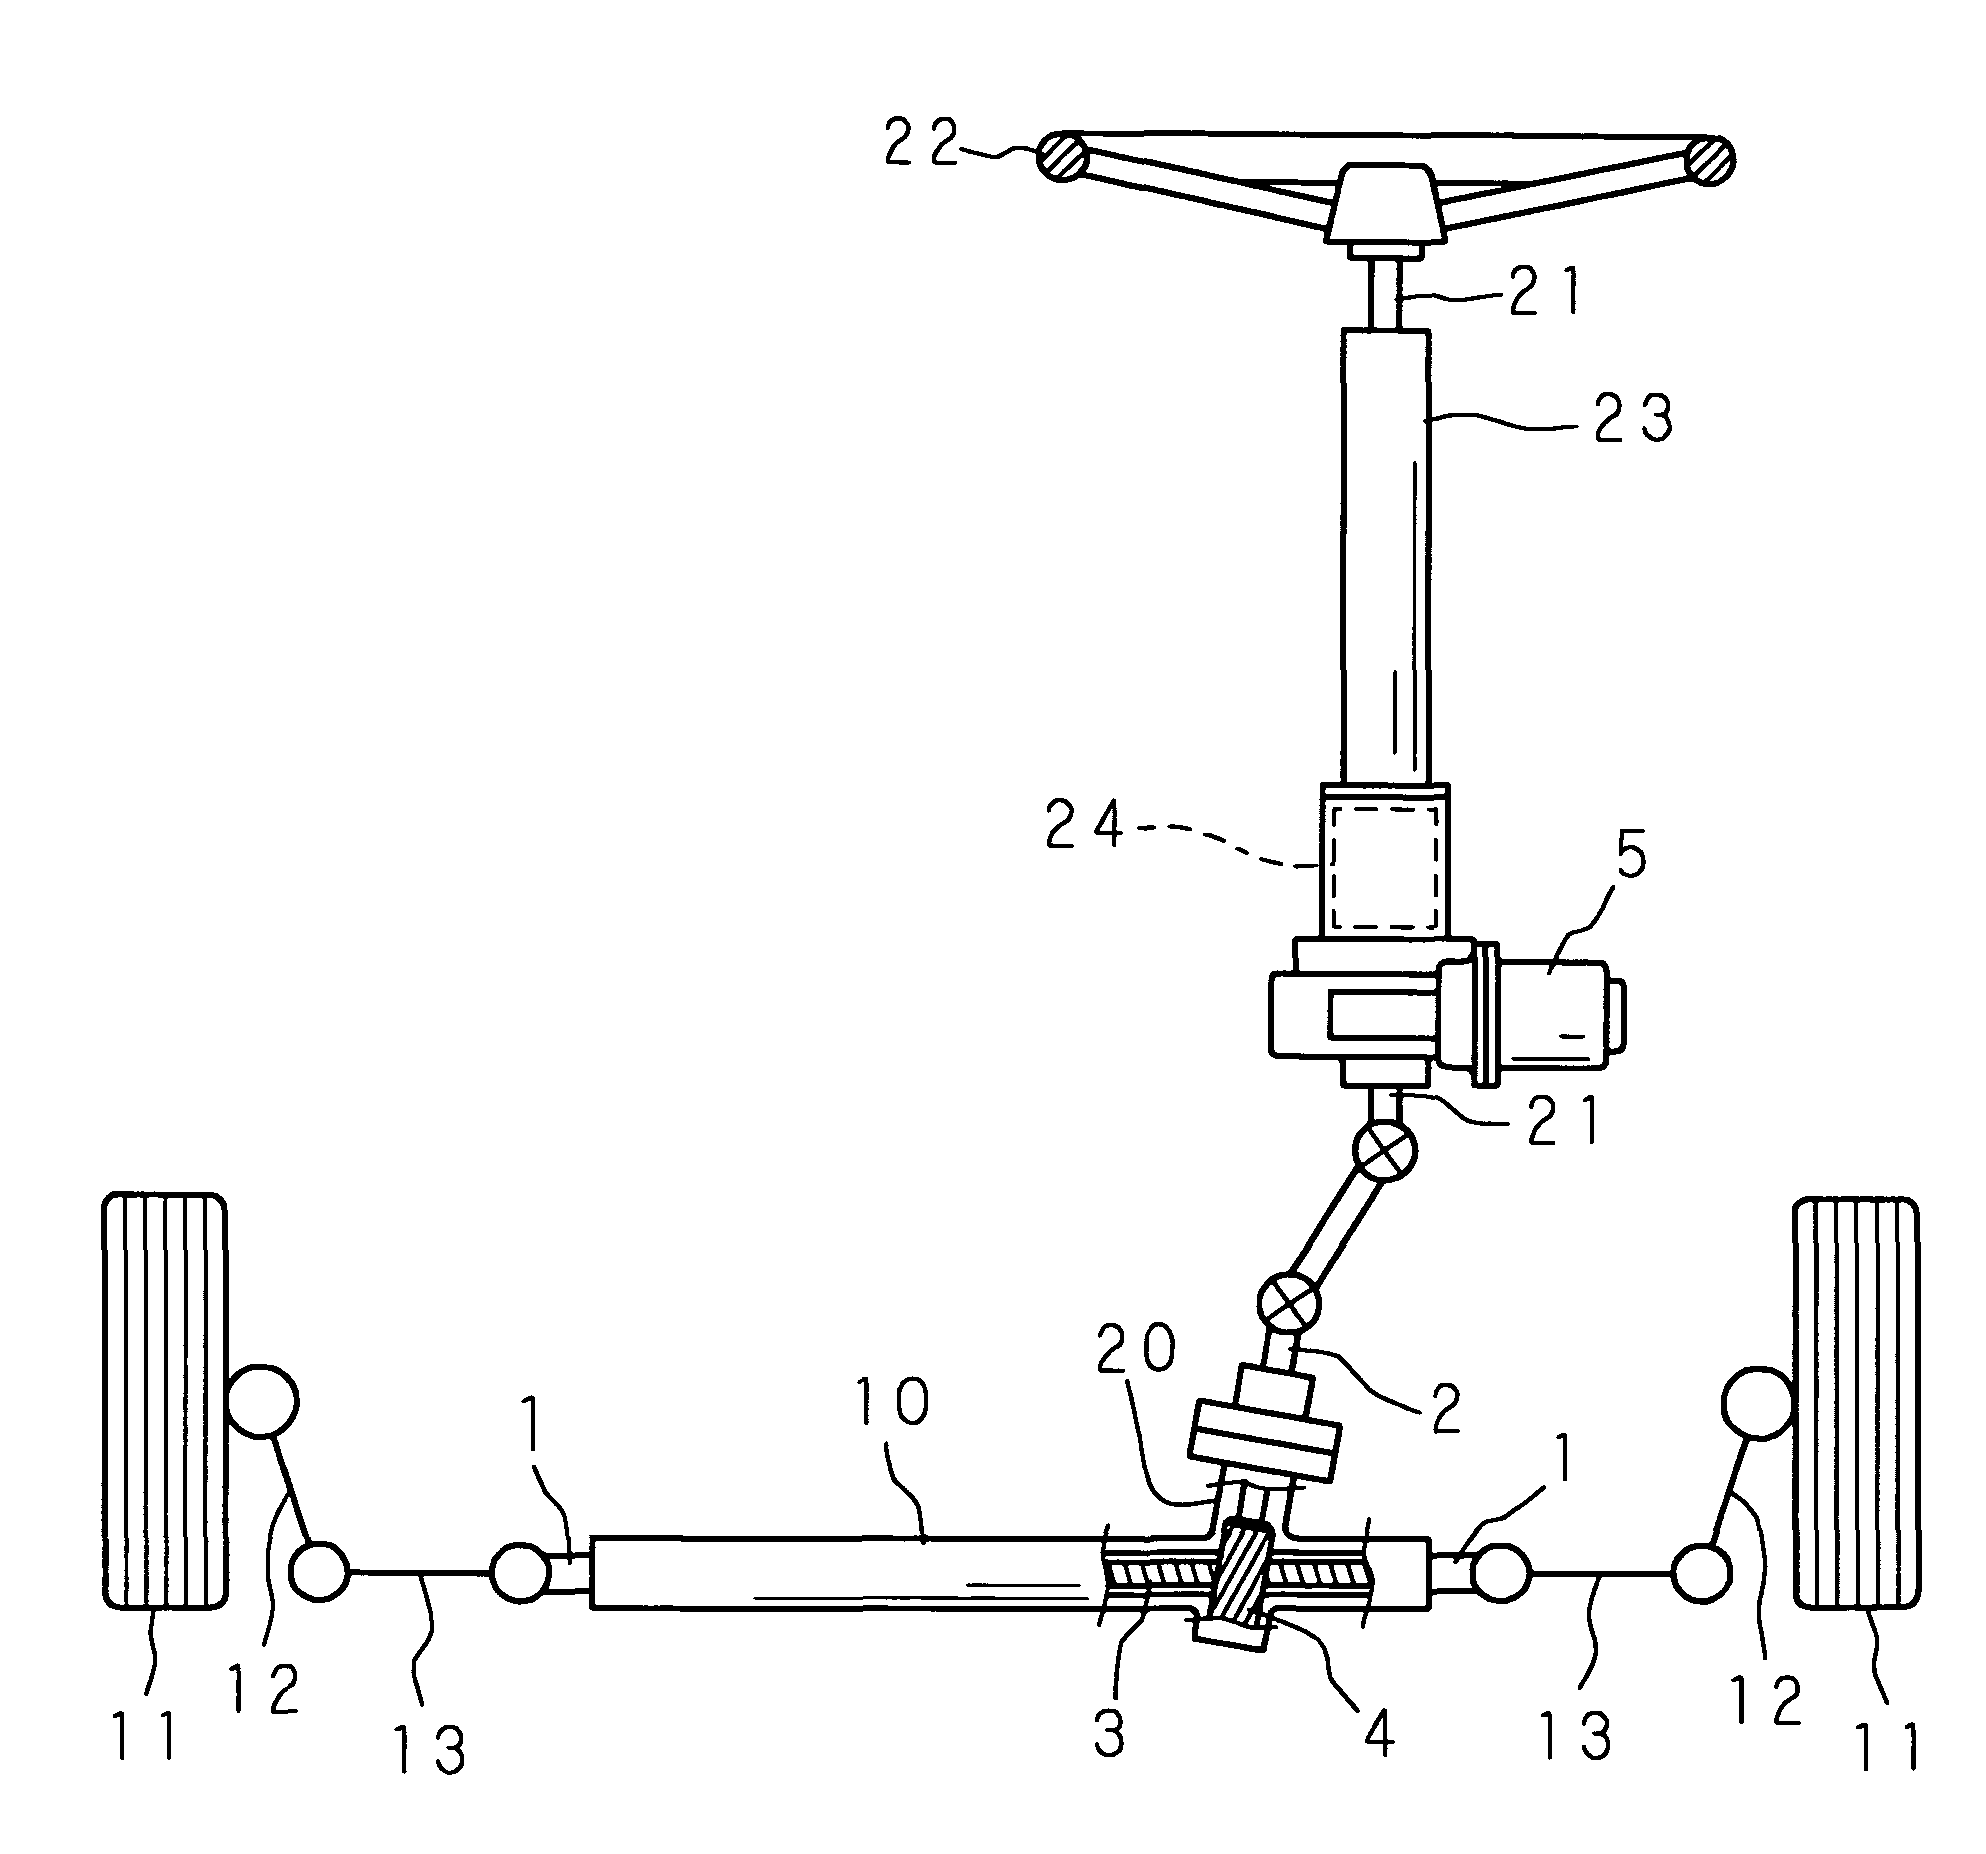 Rack-and-pinion steering apparatus